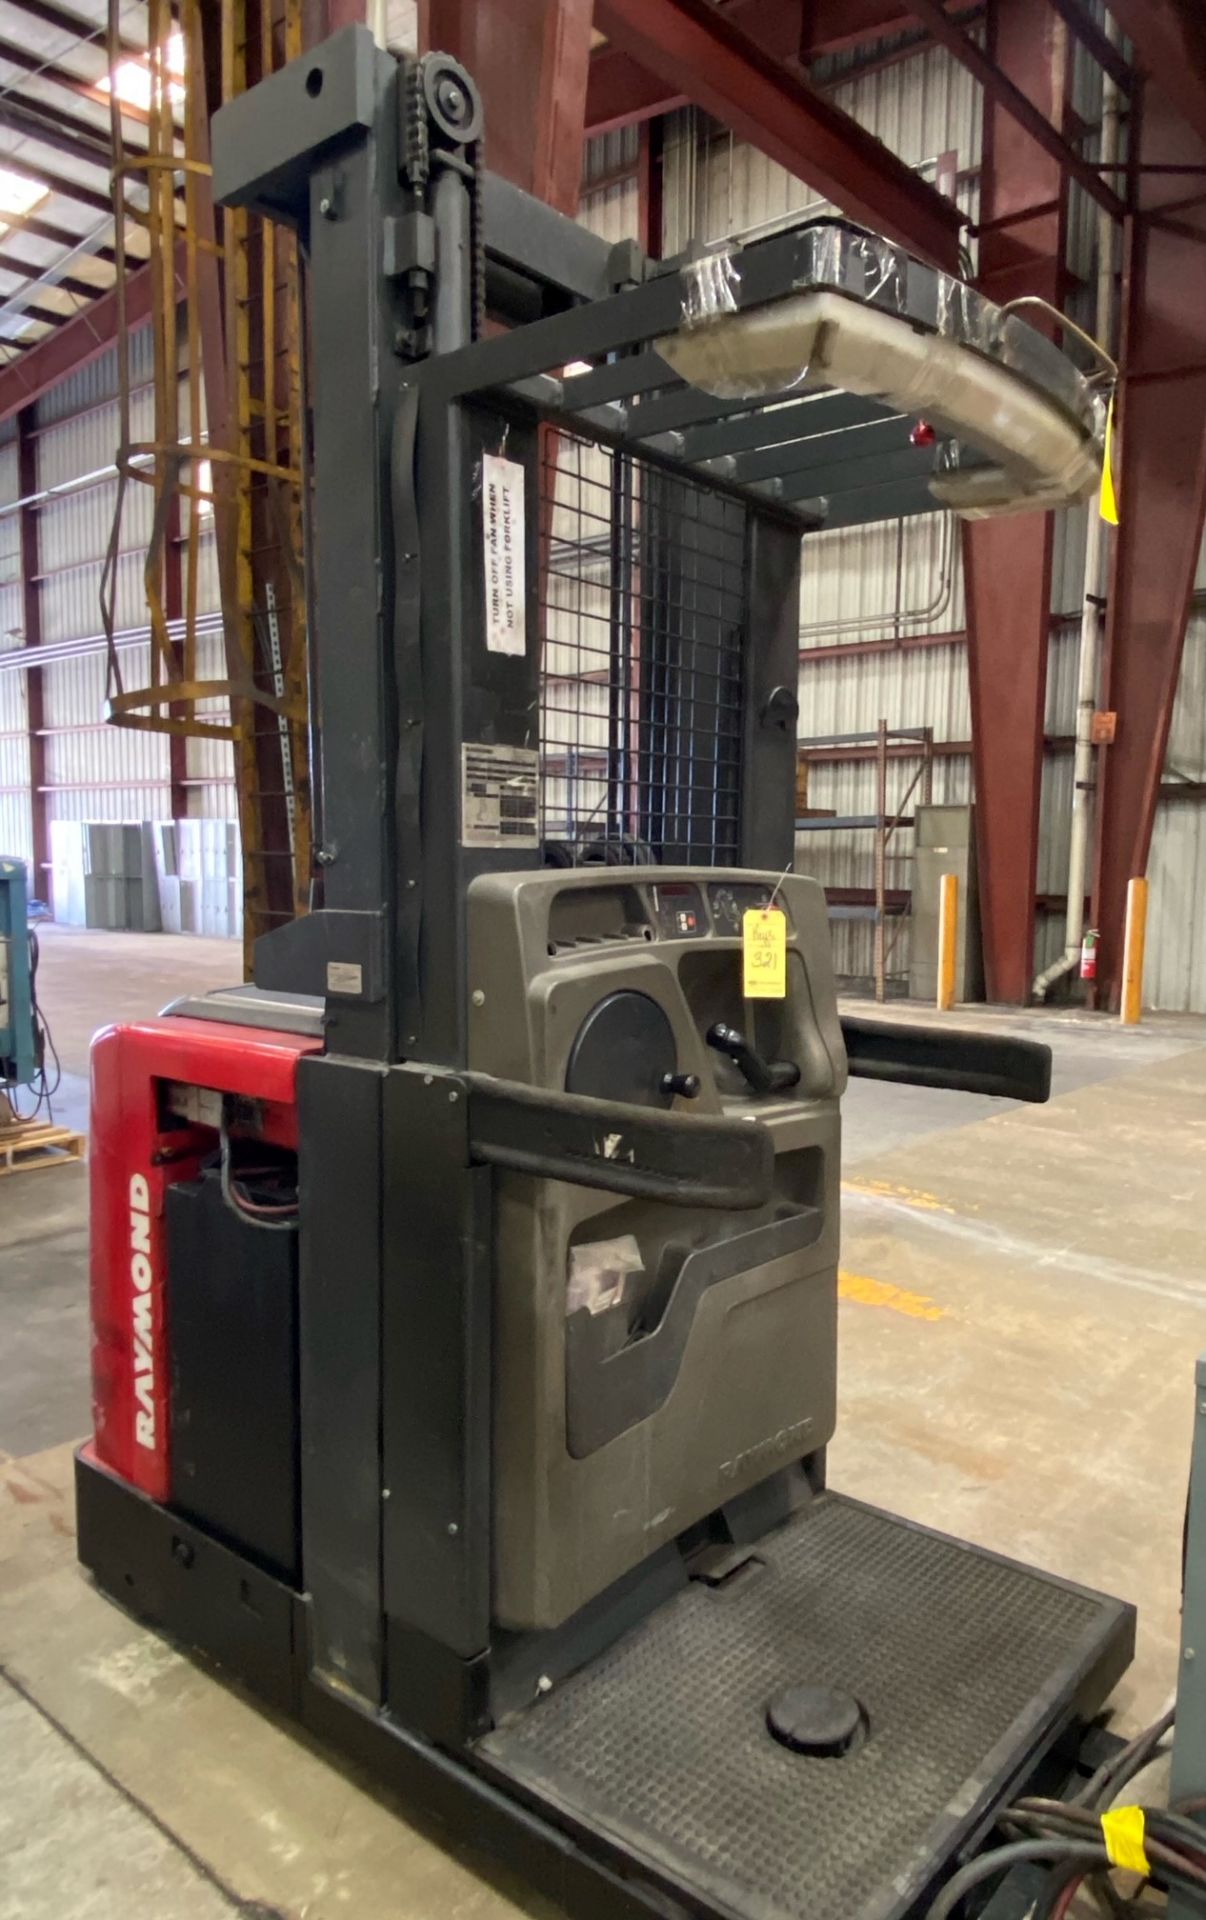 ELECTRIC FORKLIFT, RAYMOND 3000 LB. BASE CAP. MDL. 560-OPC30TT, new 2007, 36 v. electric w/charger, - Image 8 of 10